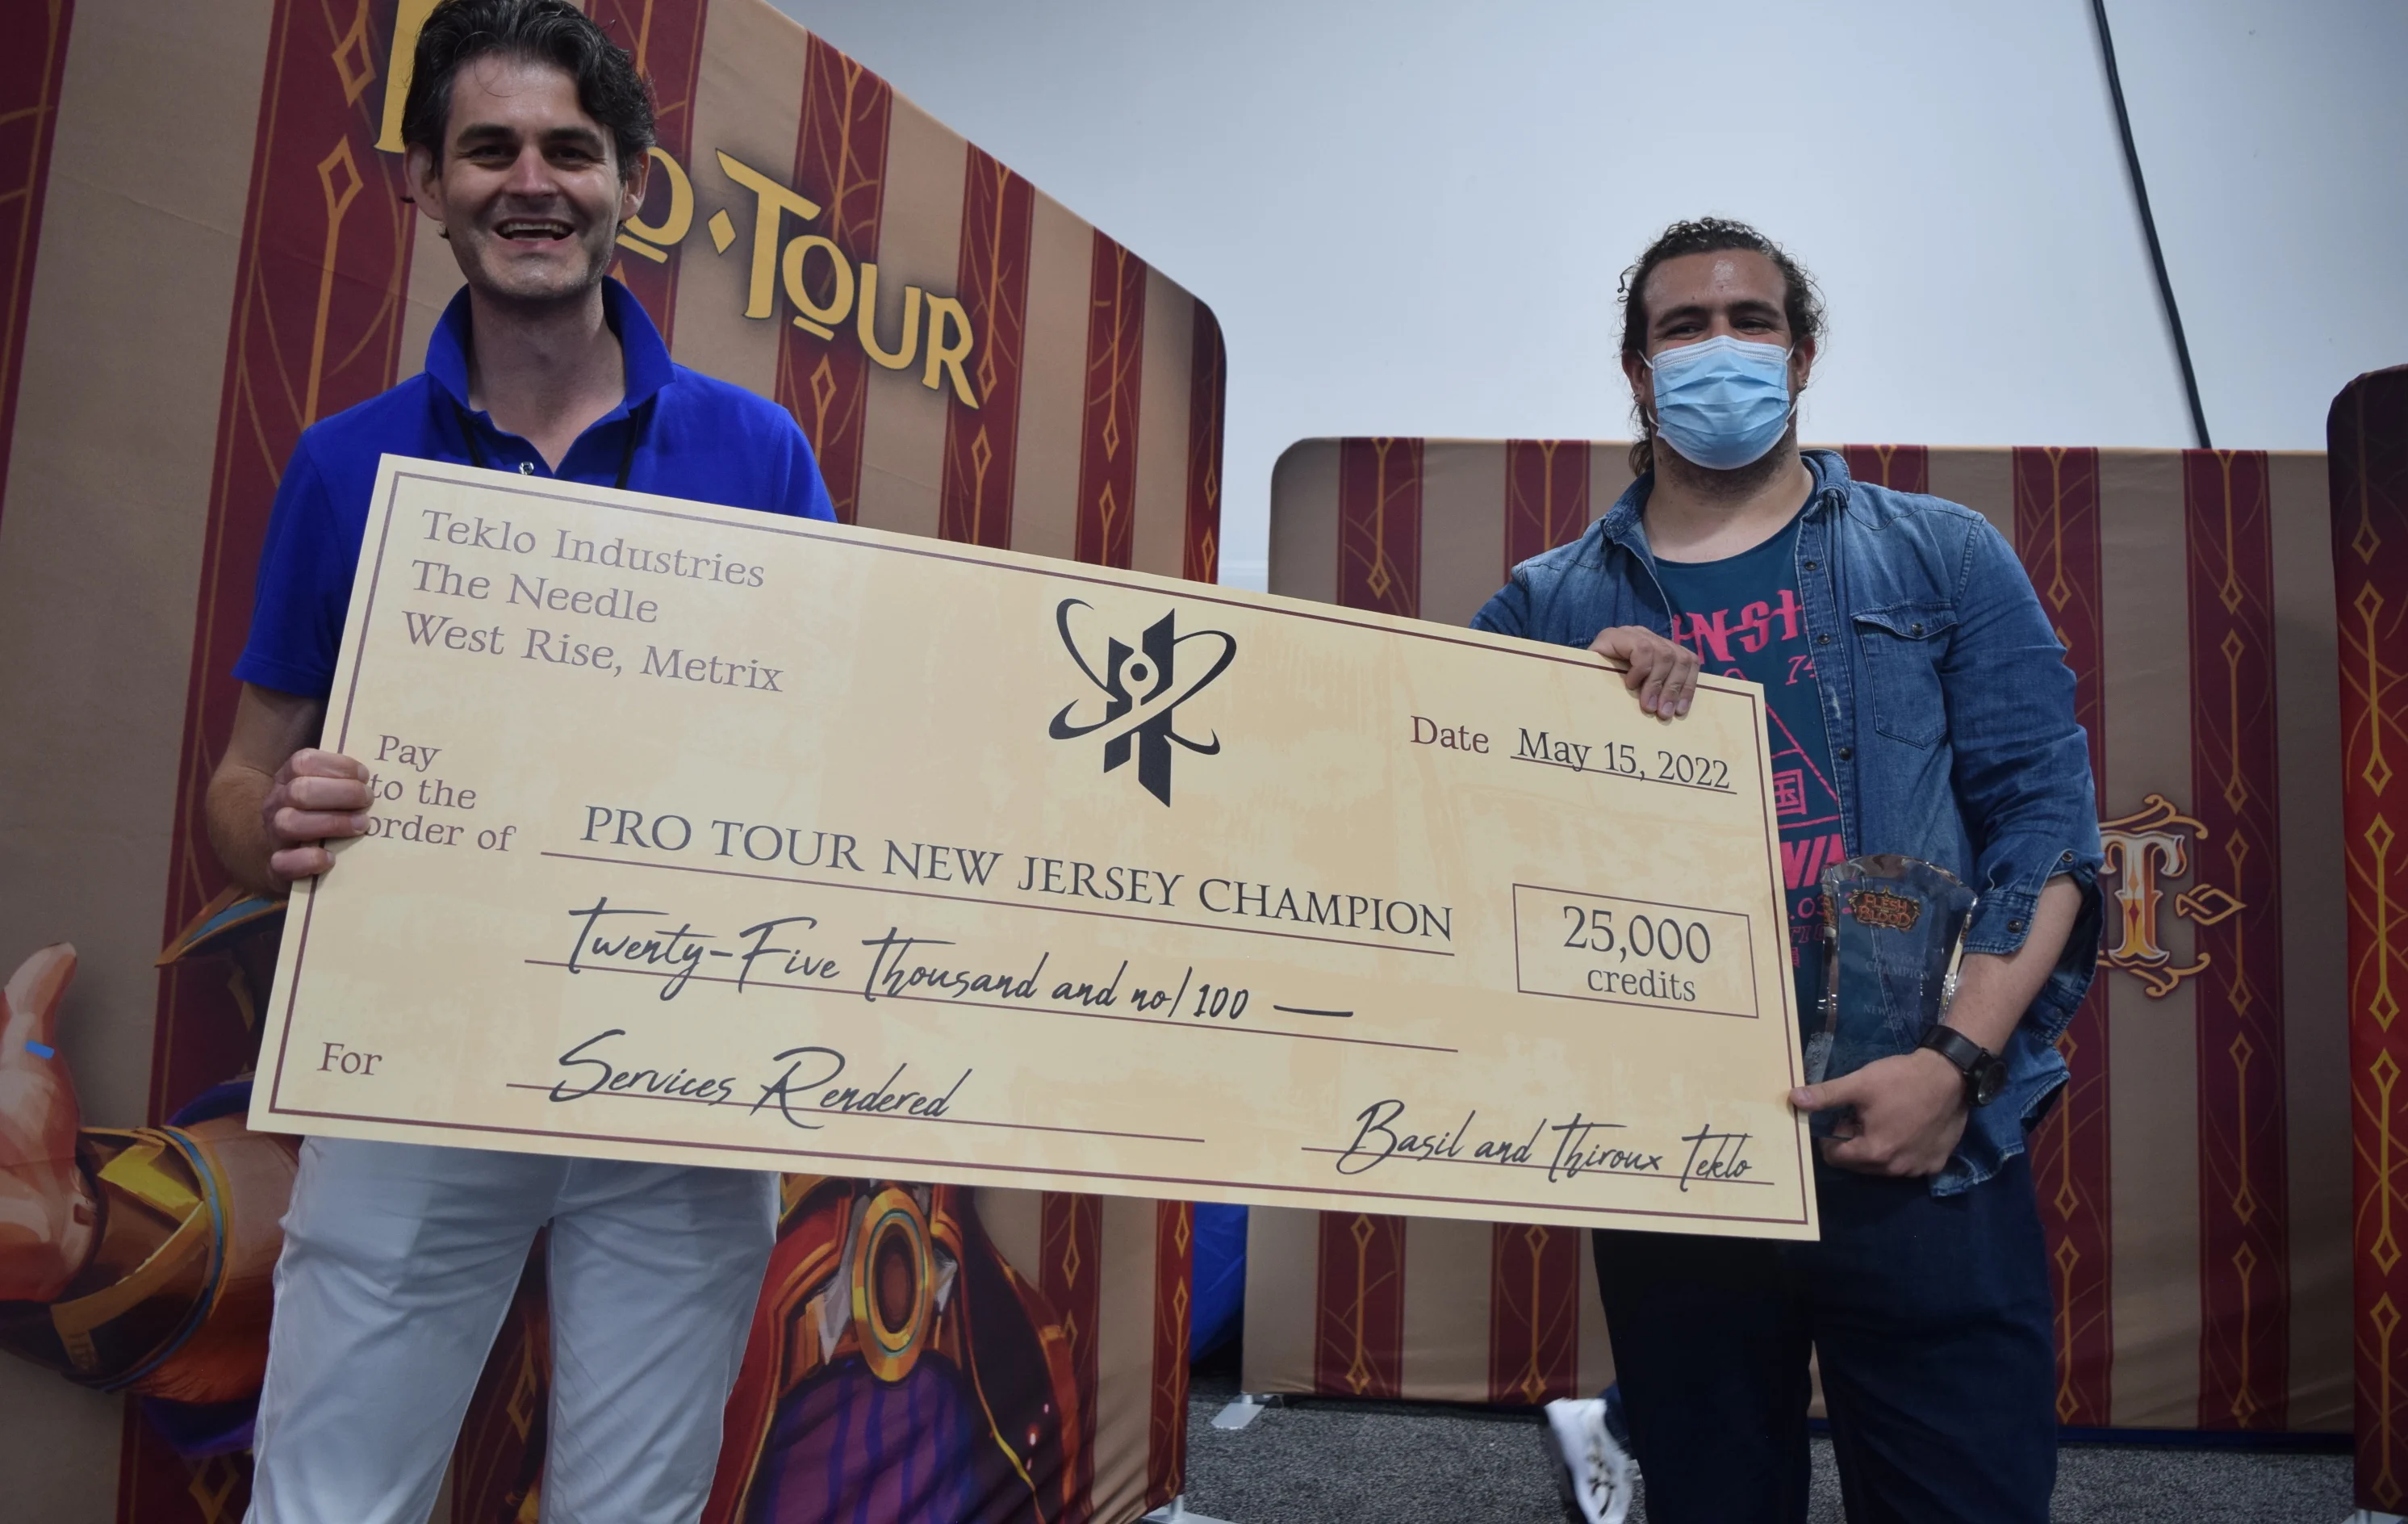 Pablo Pintor, Pro Tour Champion, receiving the prize check from James White